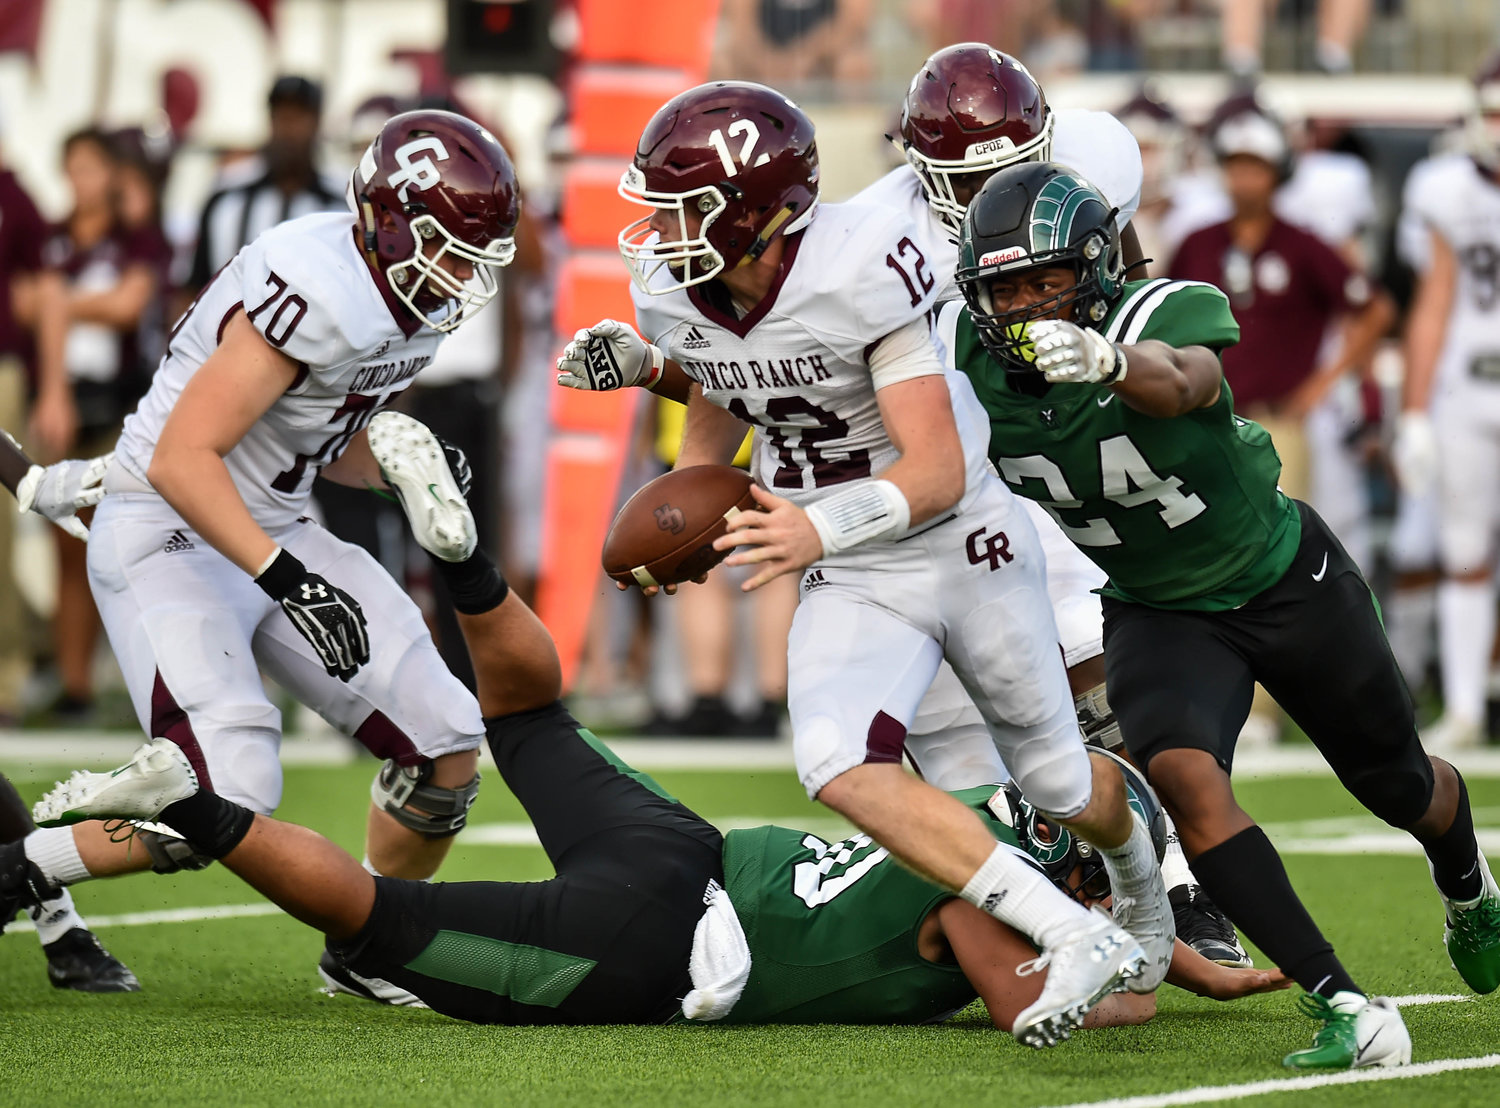 Katy, Tx. Sept. 28, 2019: Mayde Creek's Trejuan Holmes (24) gets the sack on Cinco Ranch's QB Clayton Keeling (12)during a conference game between Cinco Ranch and Mayde Creek at Legacy Stadium. (Photo by Mark Goodman / Katy Times)